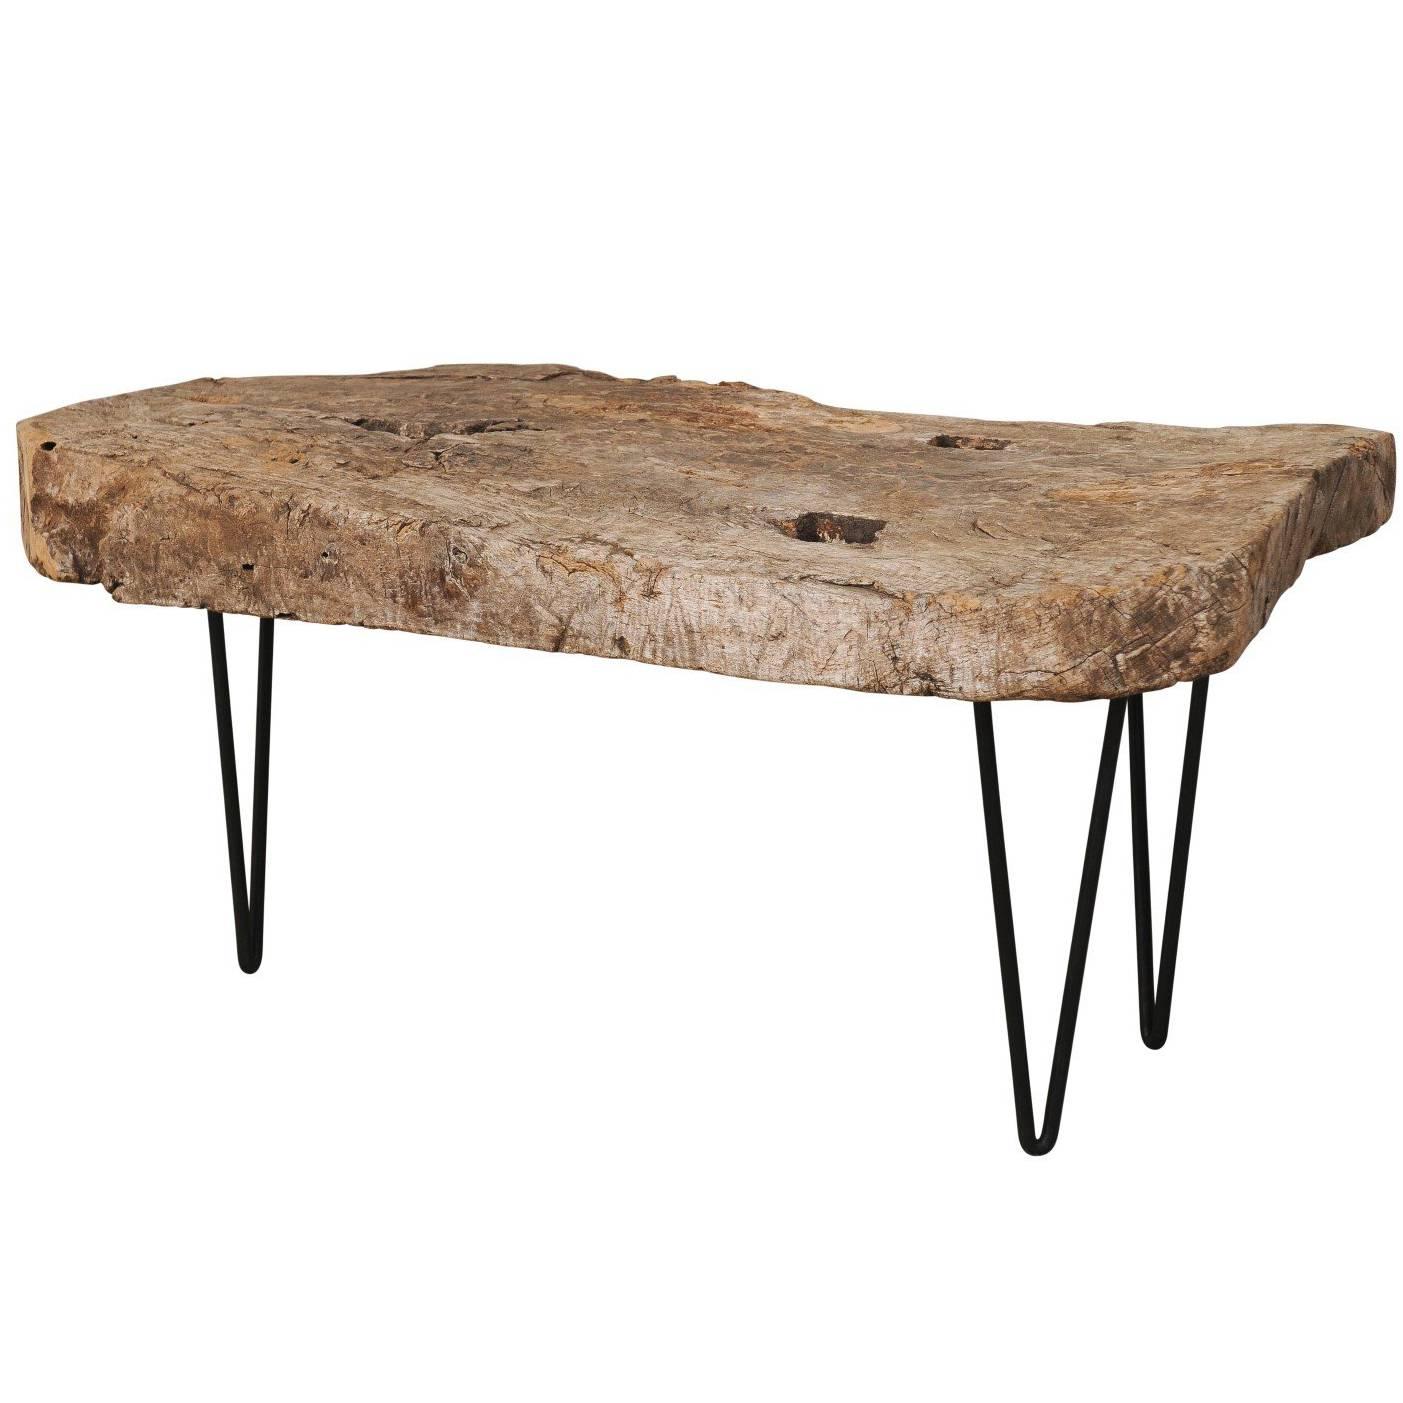 Custom-Made Coffee Table of Old Natural Rustic Spanish Wood, Iron Base